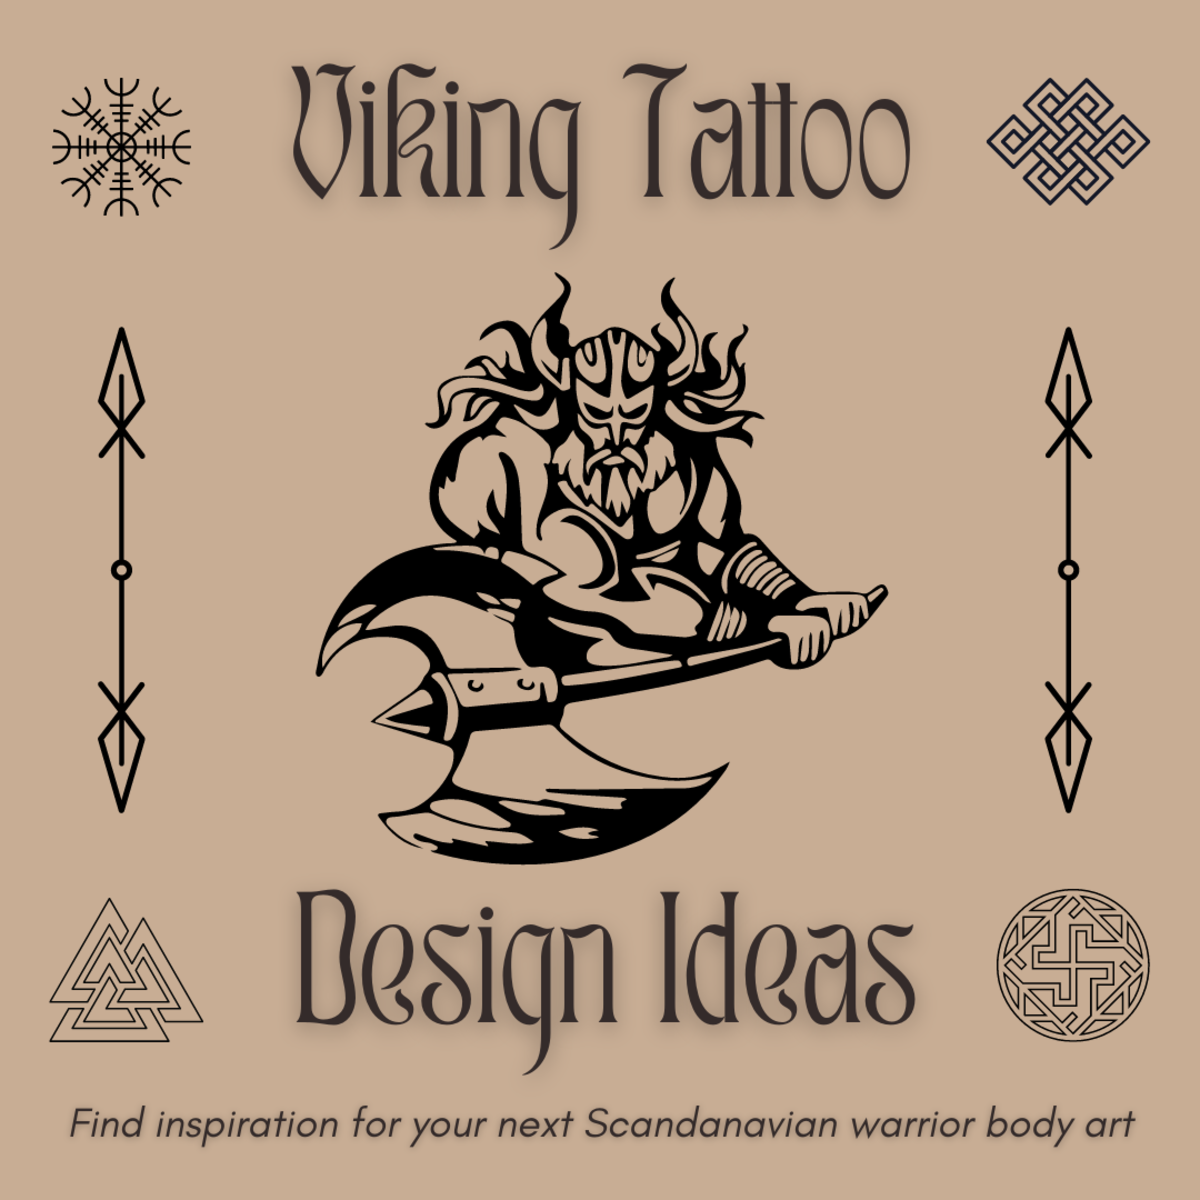 This article will provide lots of Viking tattoo examples to help you get inspired for your next body art project!